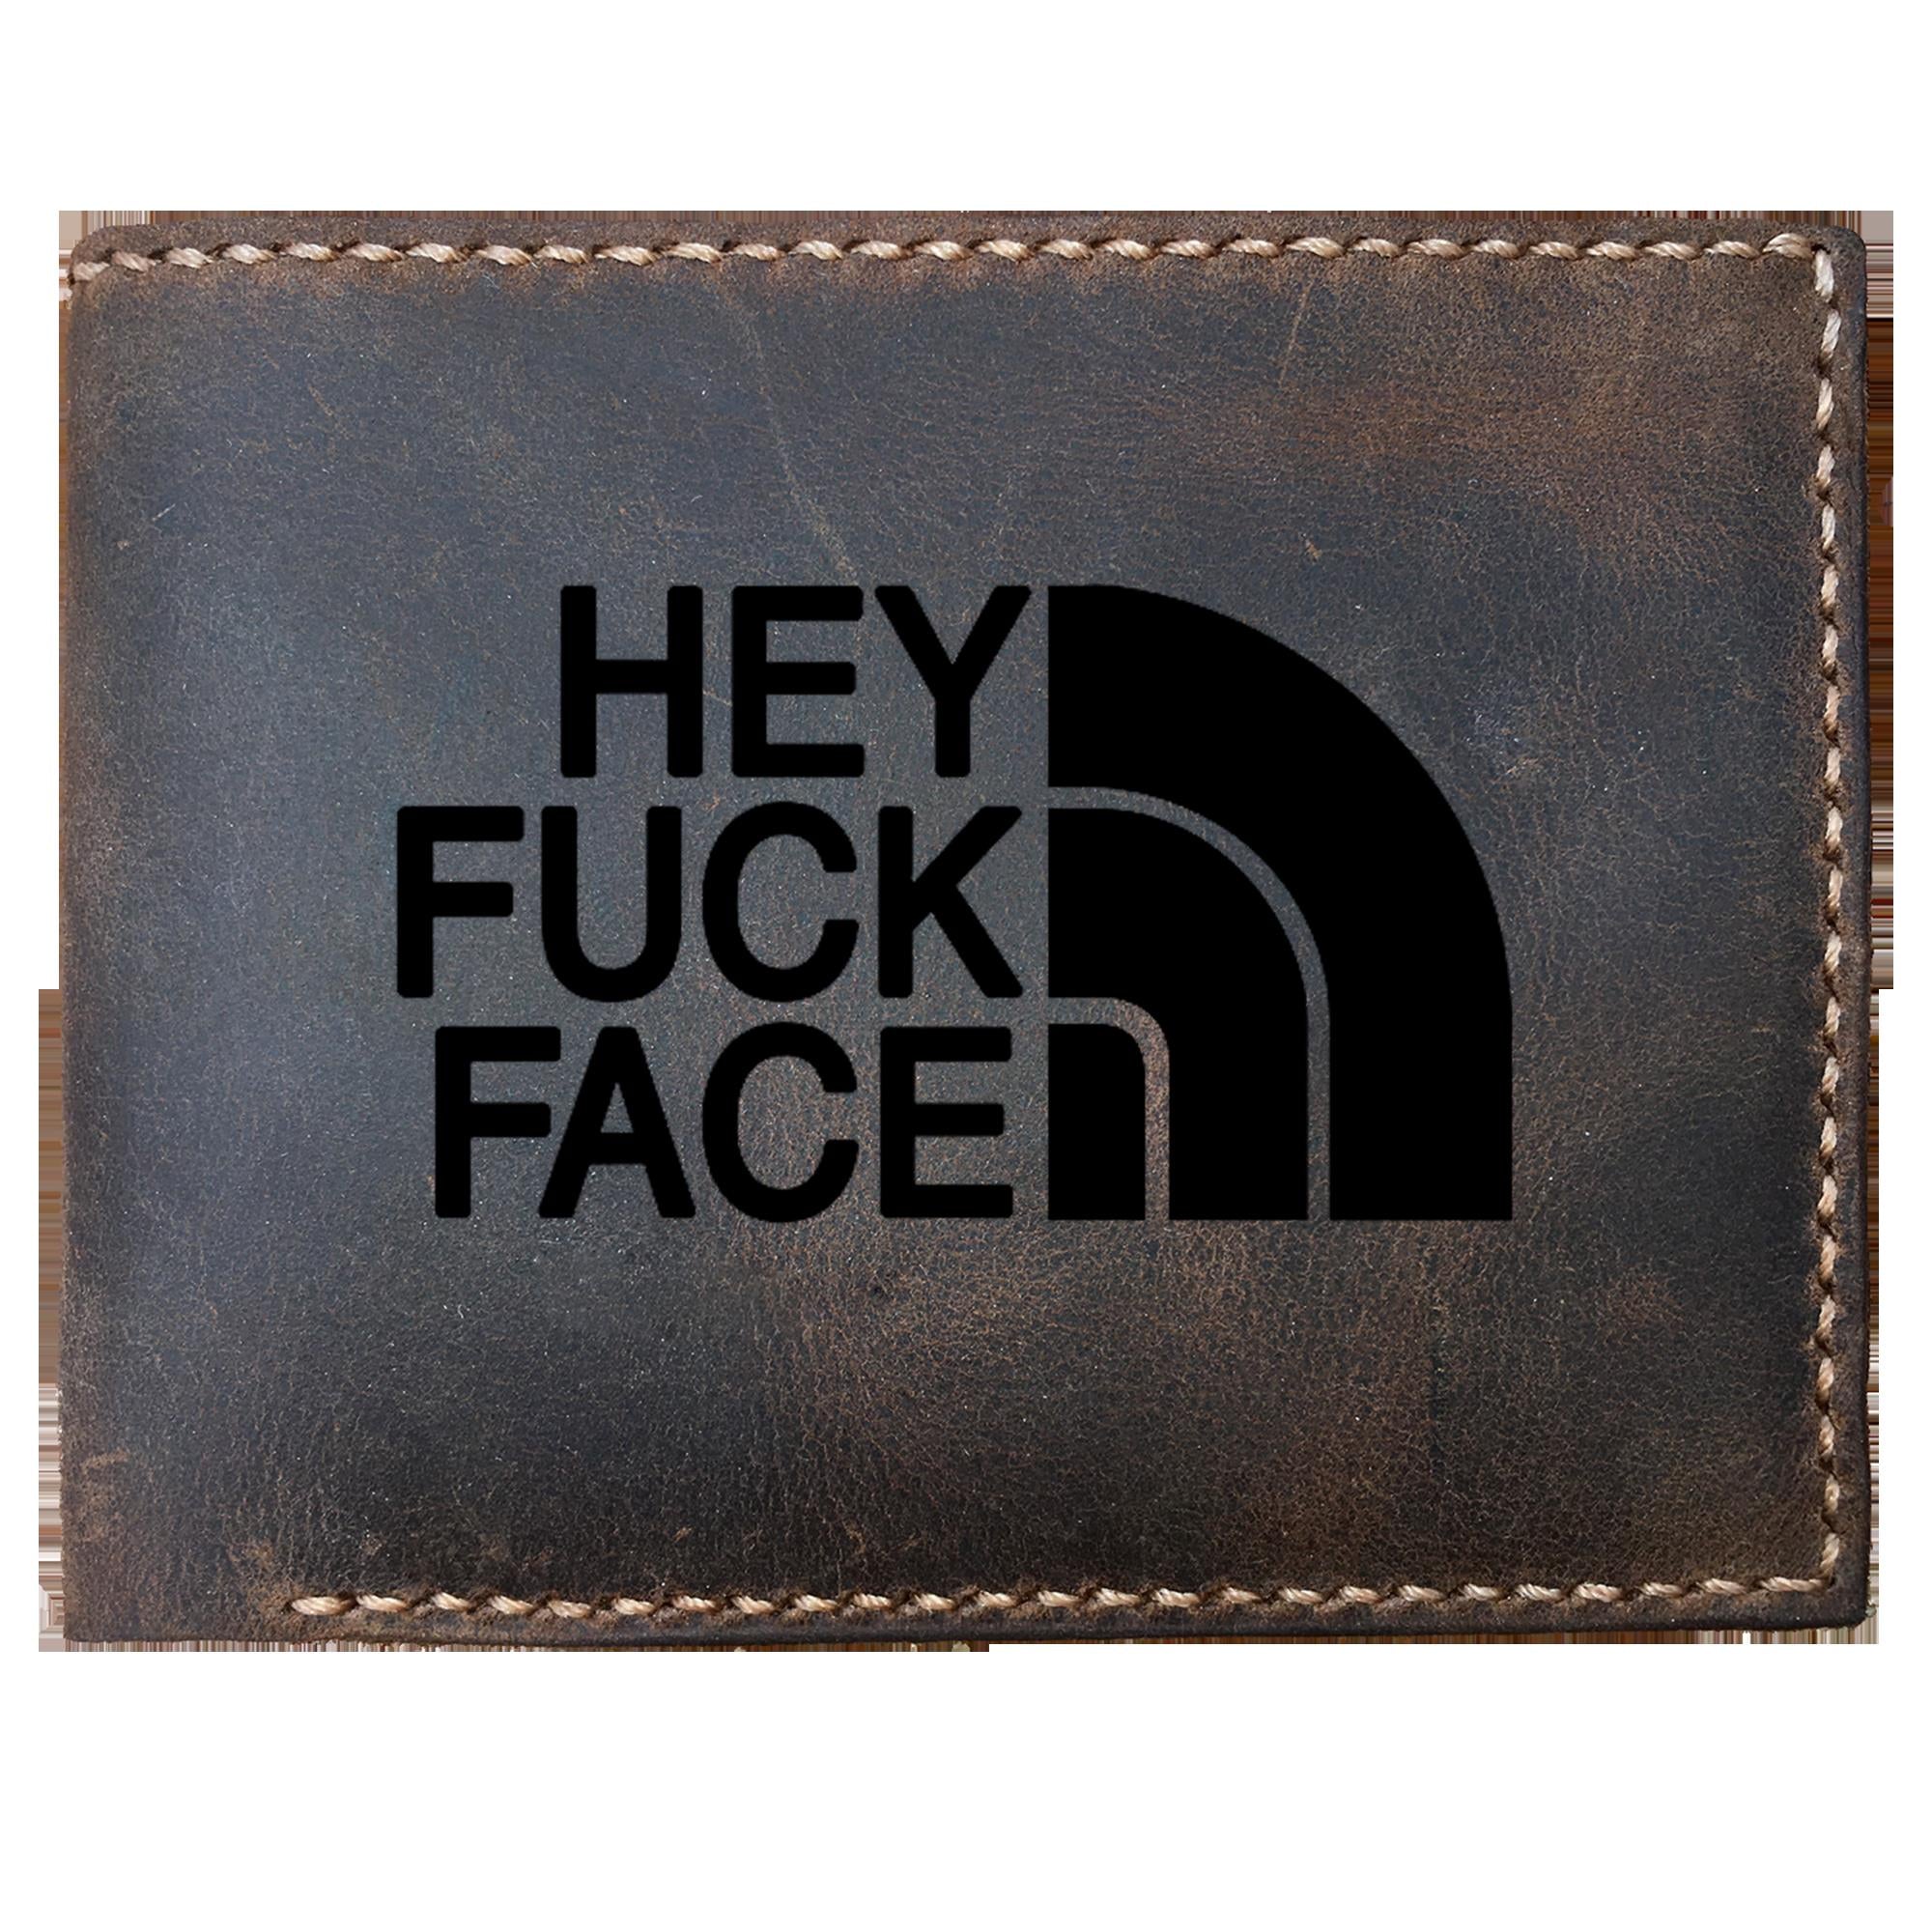 Skitongifts Funny Custom Laser Engraved Bifold Leather Wallet For Men, Hey Fuck Face